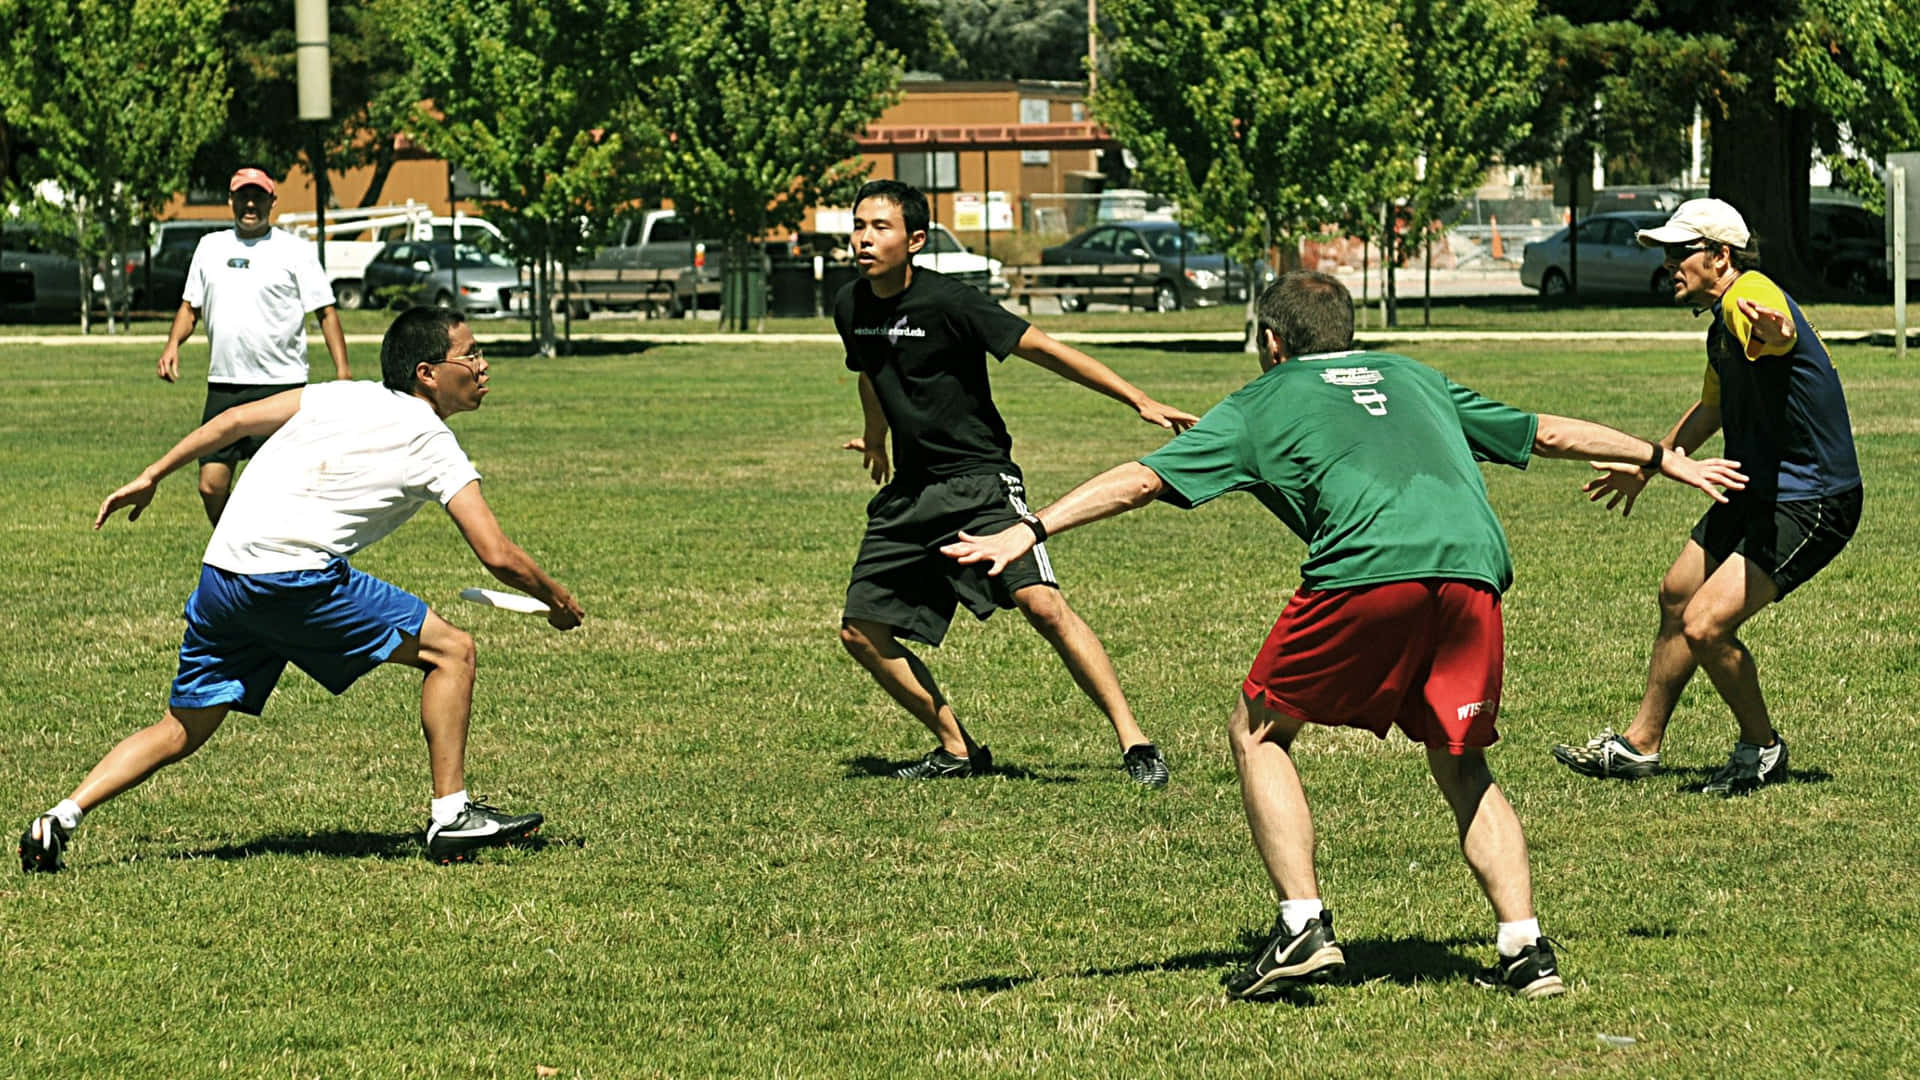 A Group Of People Playing Frisbee